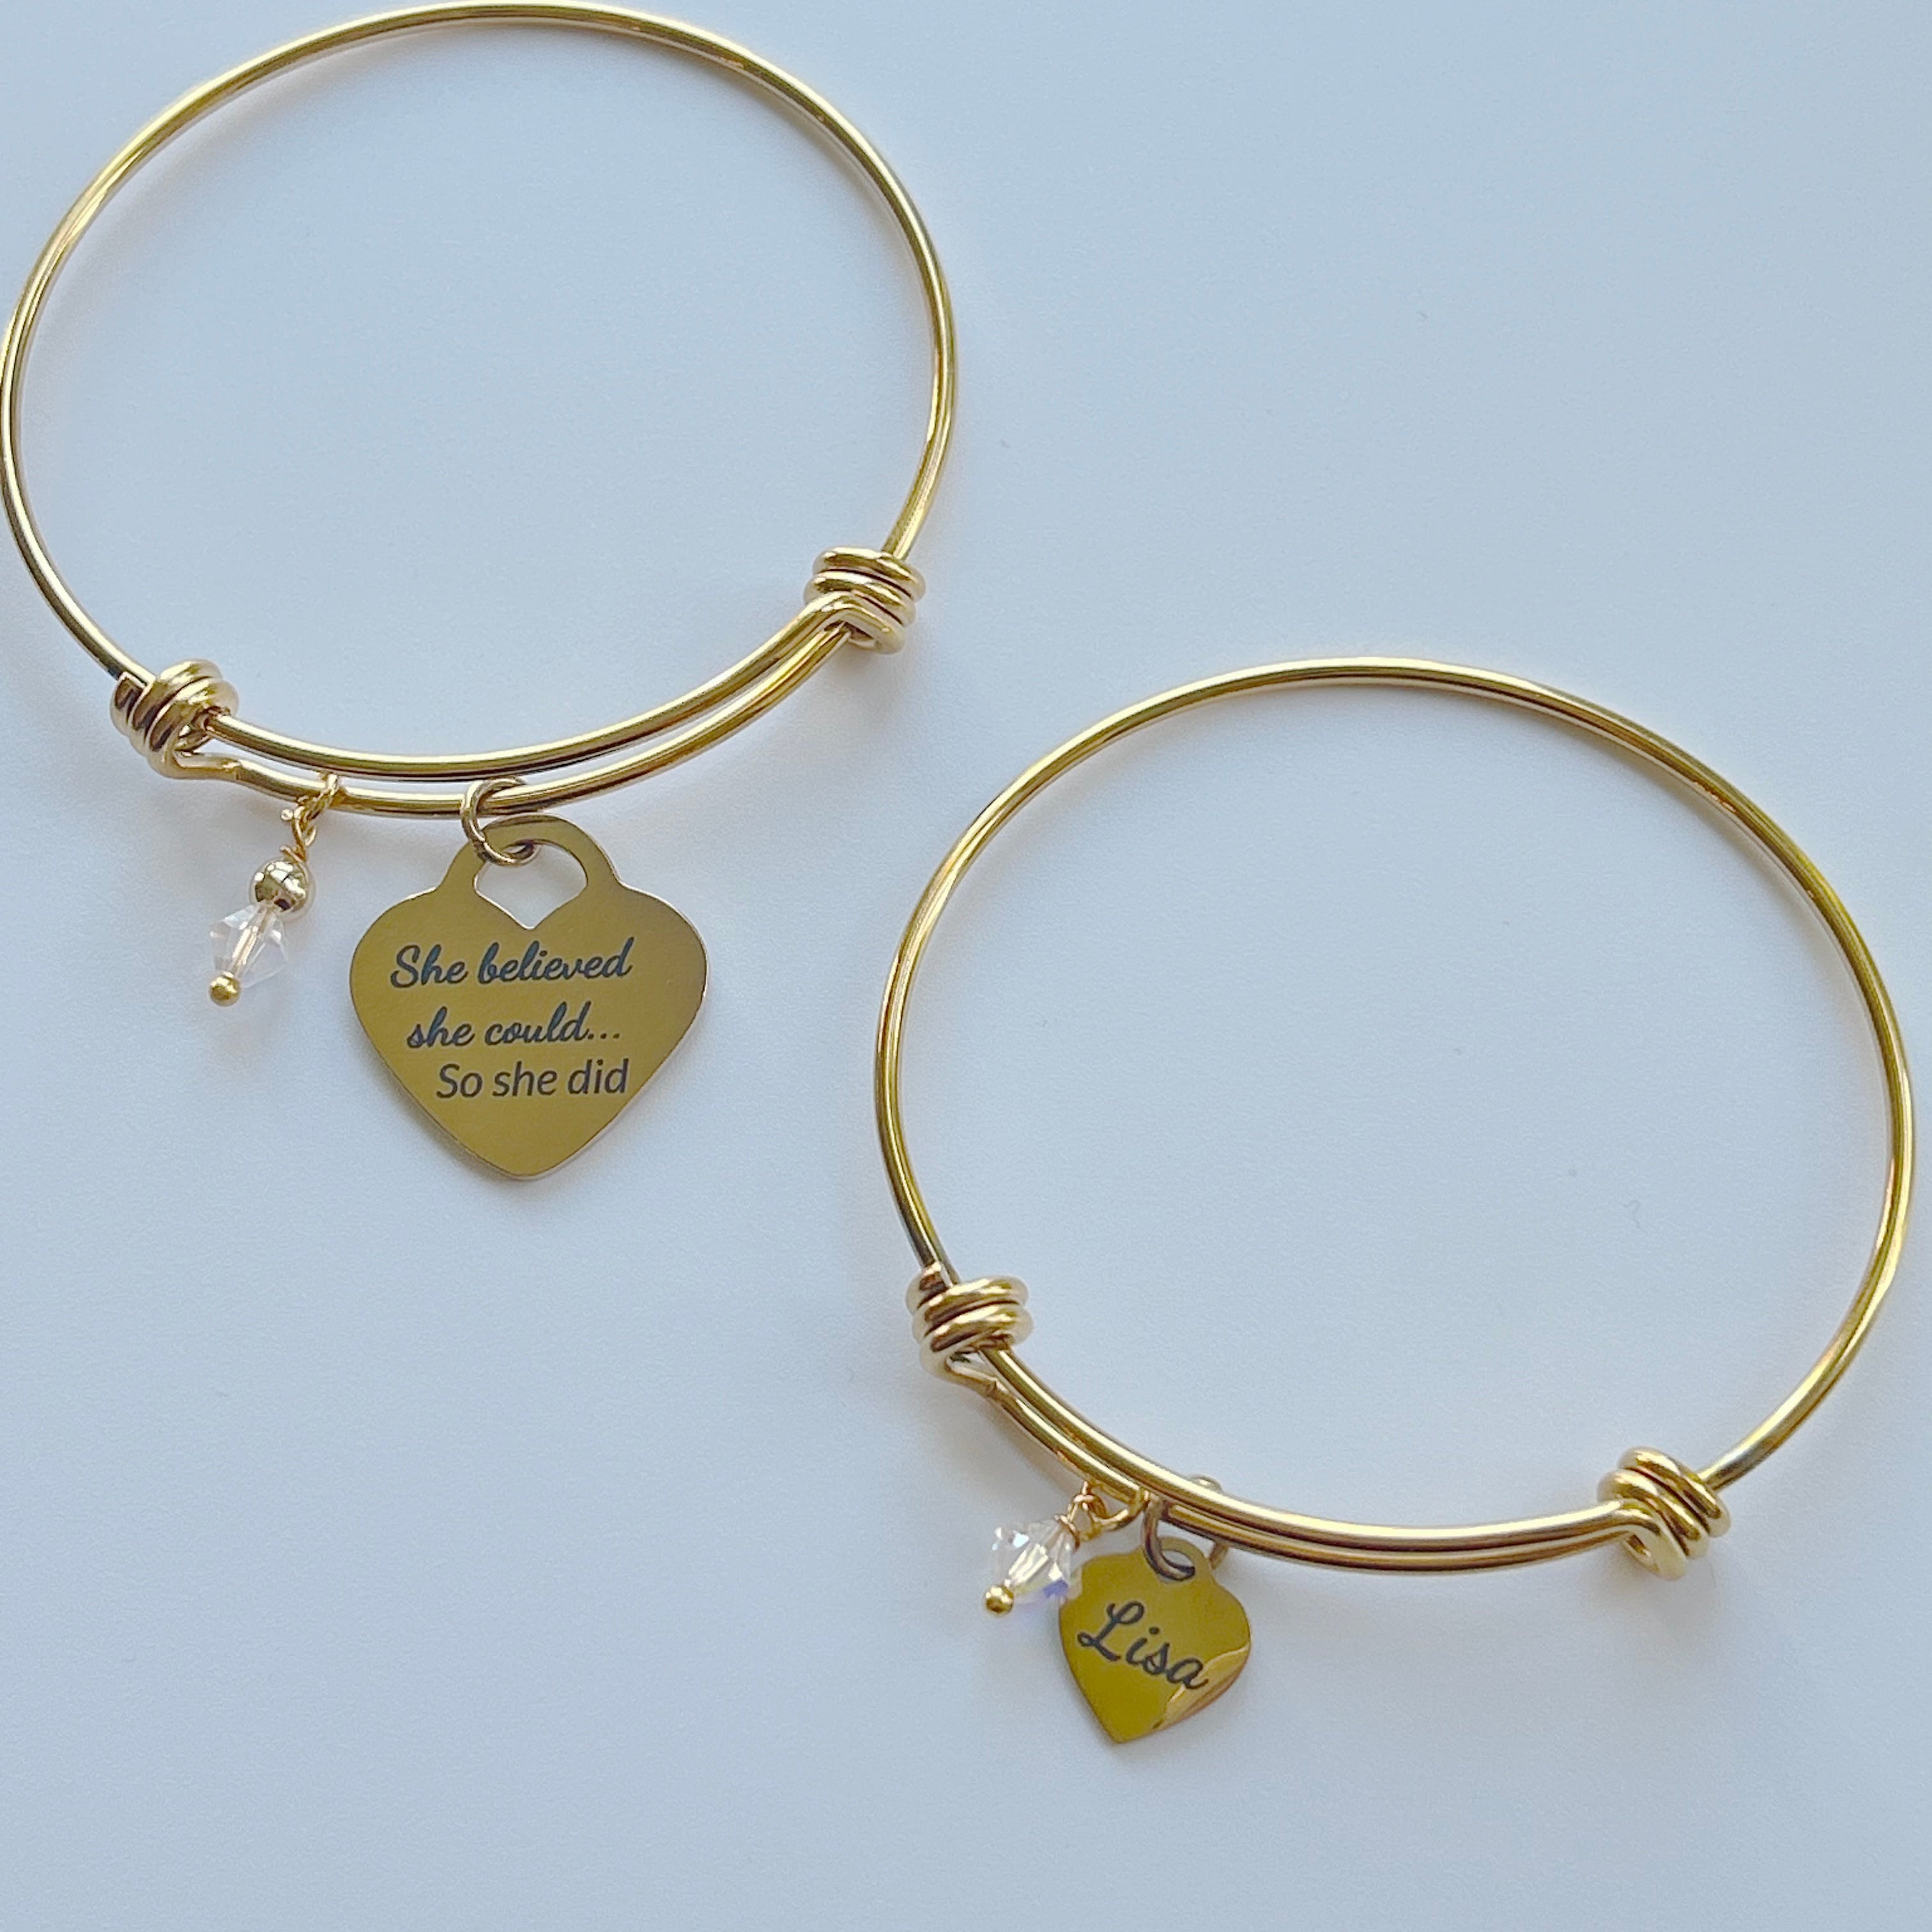 this image shows two bangle style bracelets , both with a clear crystal bead accent; one features a Large heart charm saying "She believed she could so she did", the other has the name "Lisa"